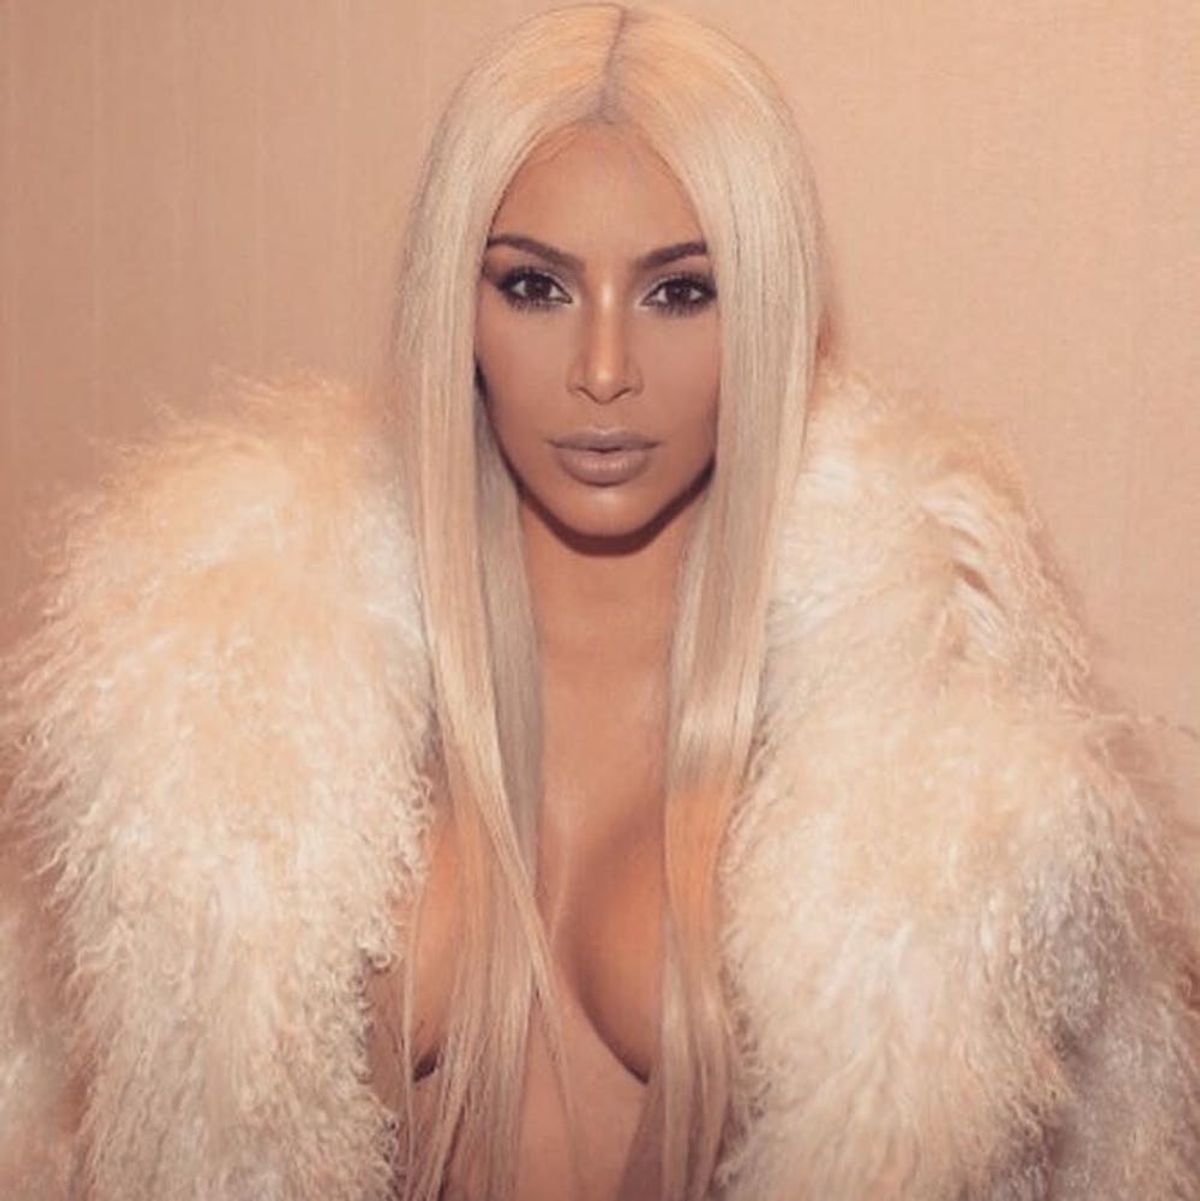 Kim Kardashian West Uses This Unlikely Item as Her Cleavage Secret